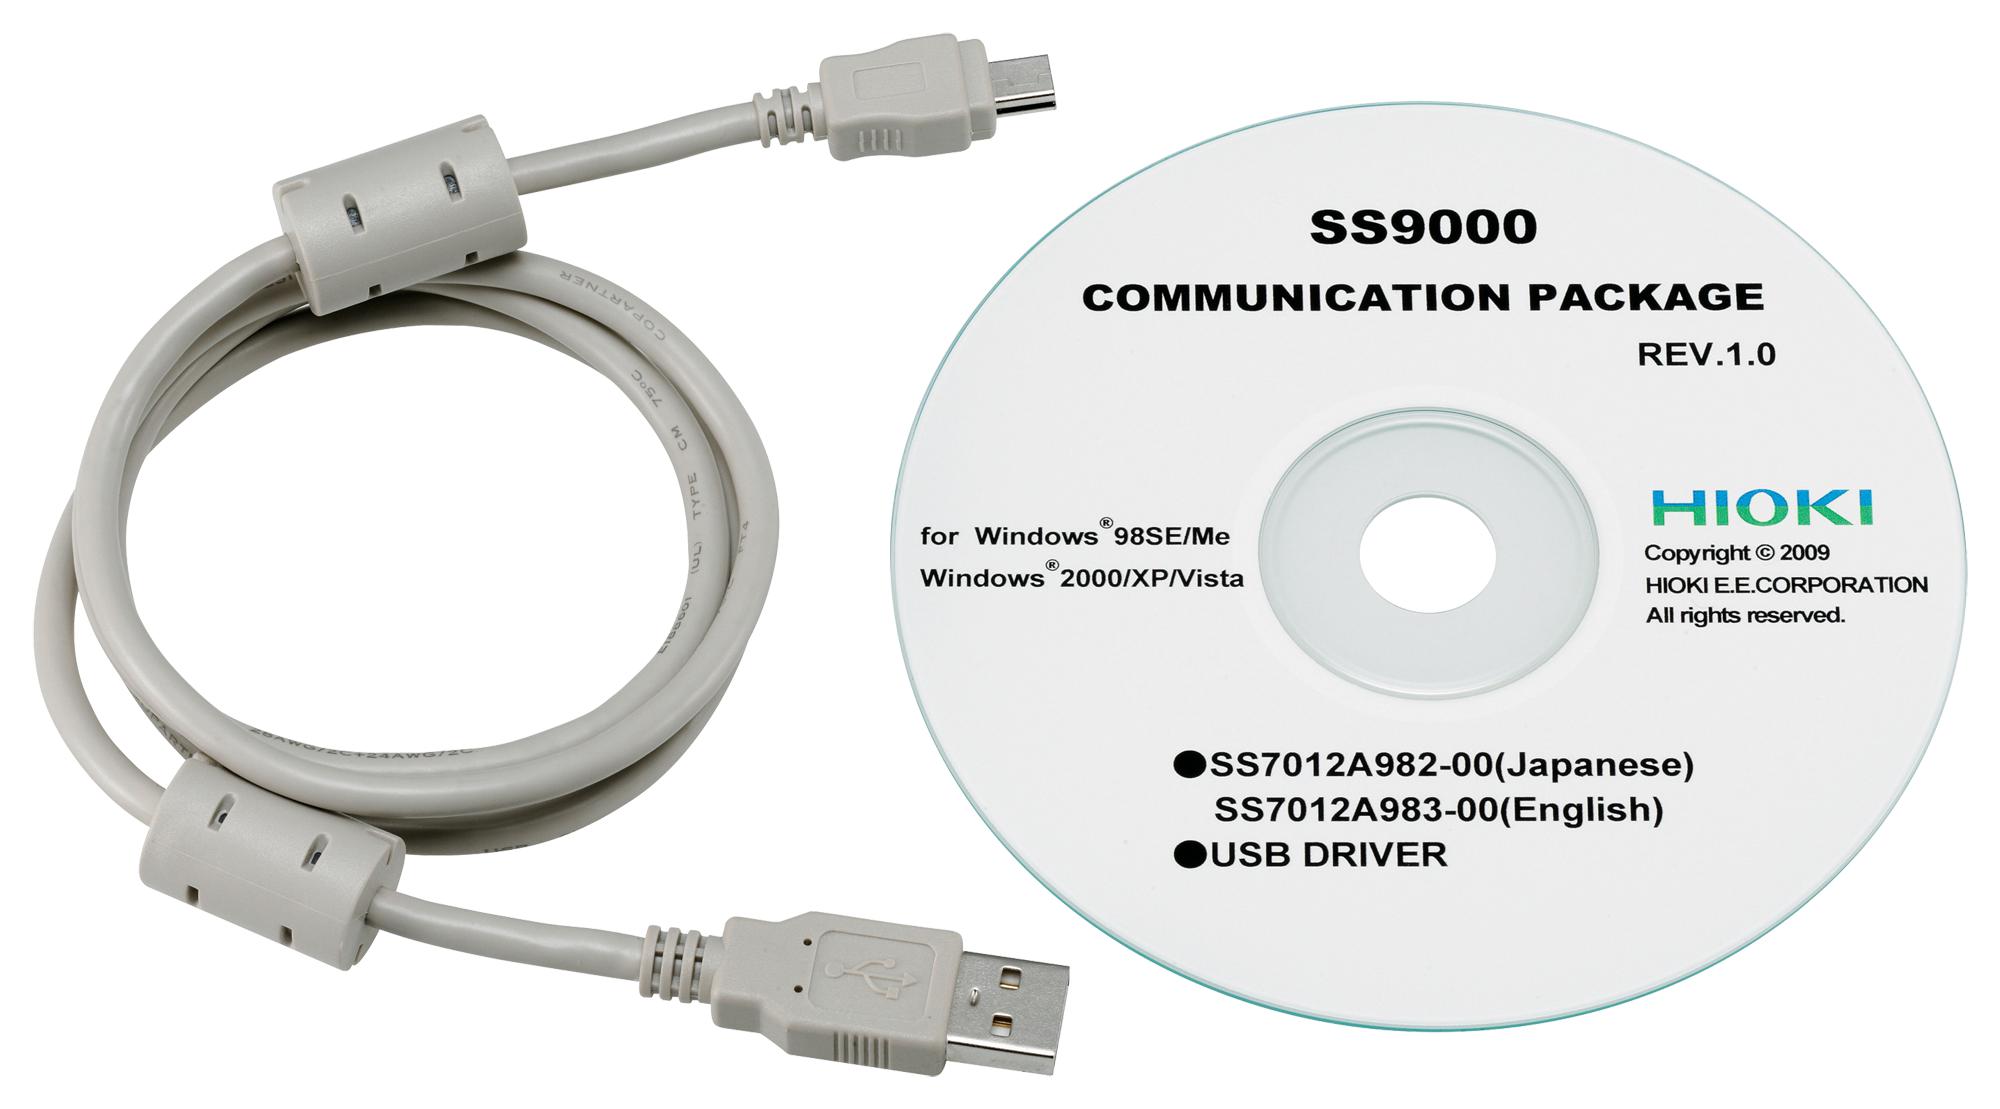 SS9000 COMMUNICATION PACKAGE, DC SIGNAL SOURCE HIOKI